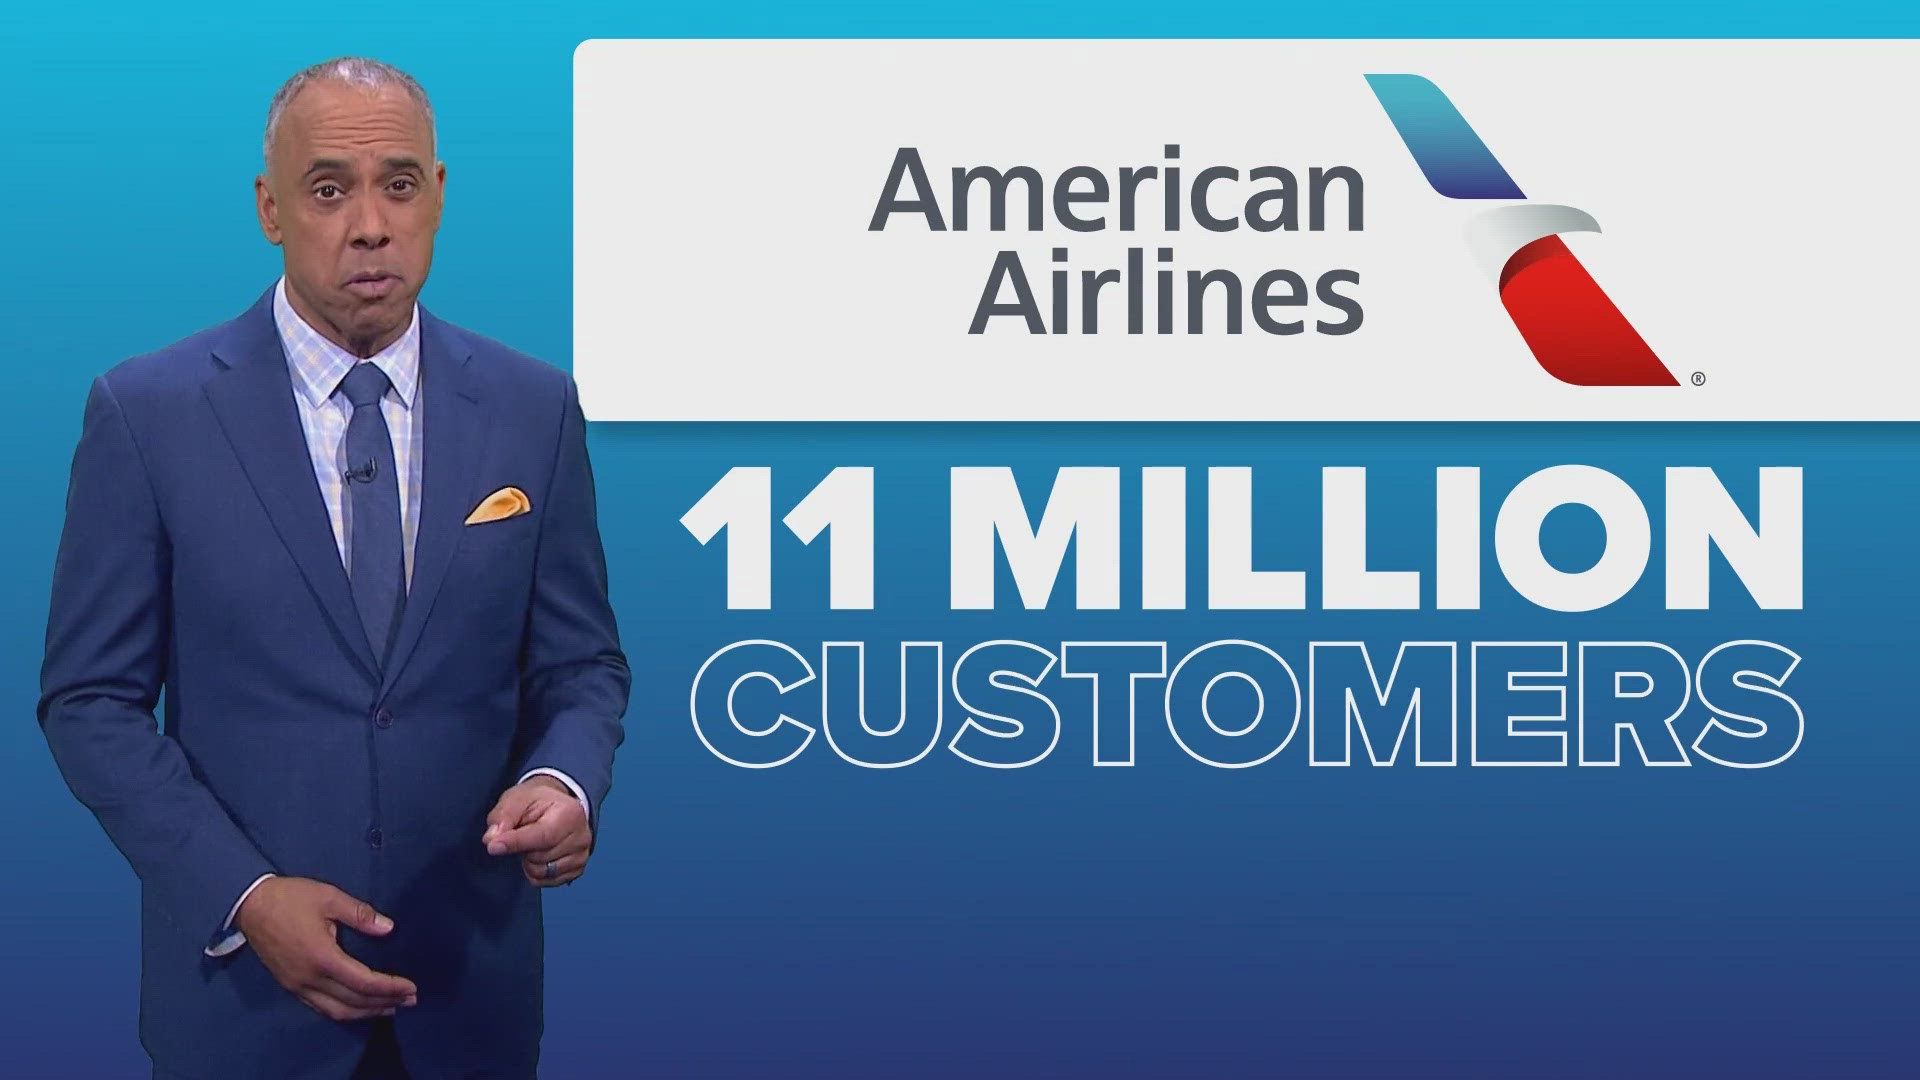 Between May 17 and Sept. 3, American Airlines plans to serve 11 million customers on about 97,000 flights.